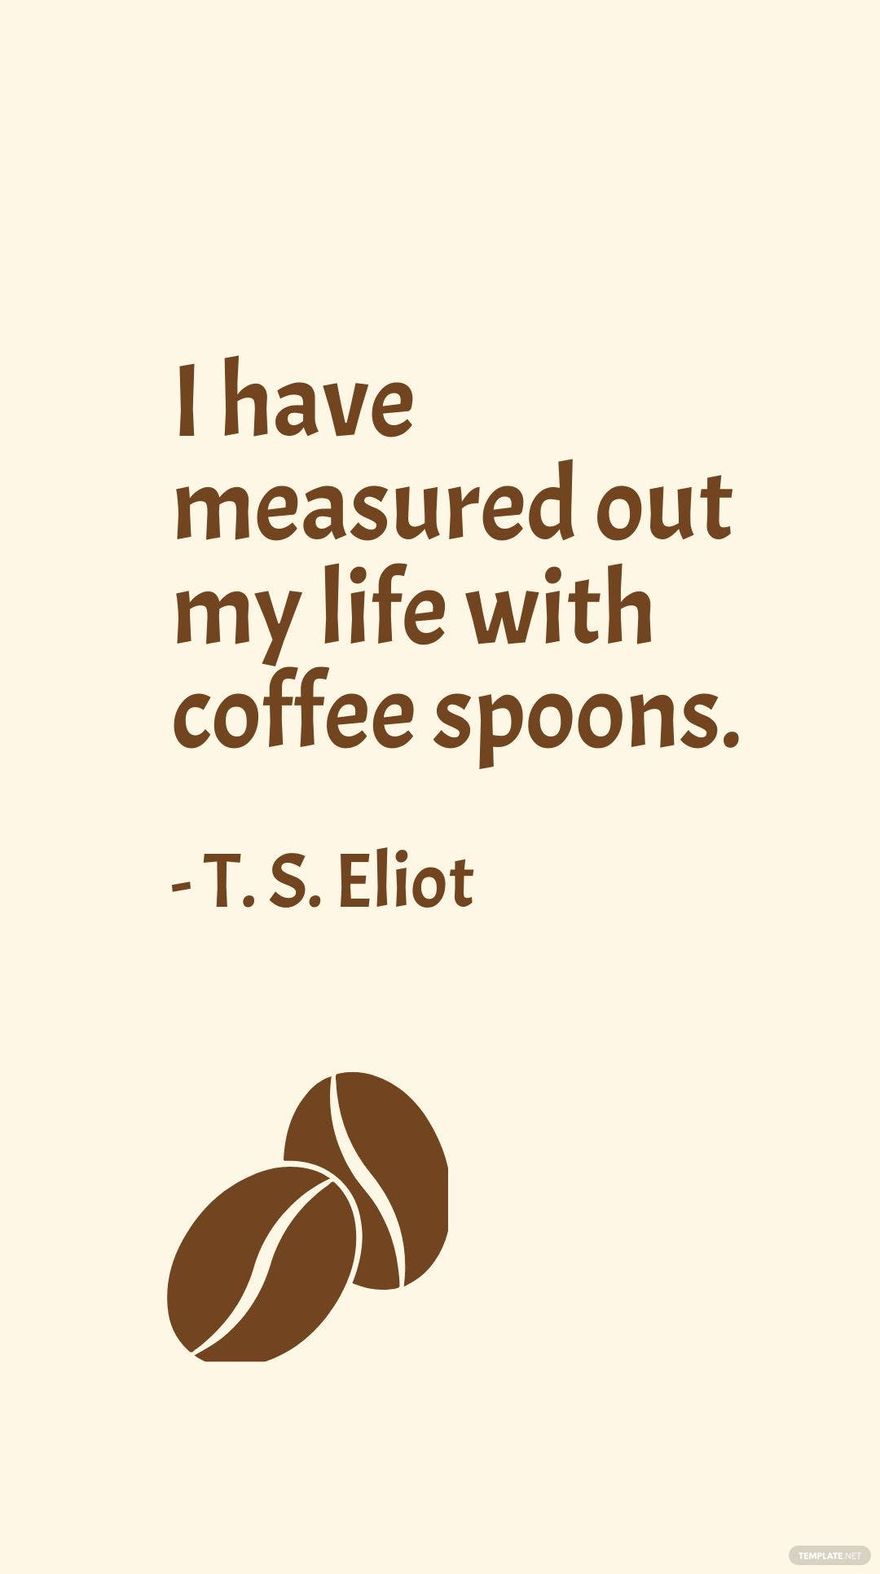 Free T. S. Eliot - I have measured out my life with coffee spoons. in JPG